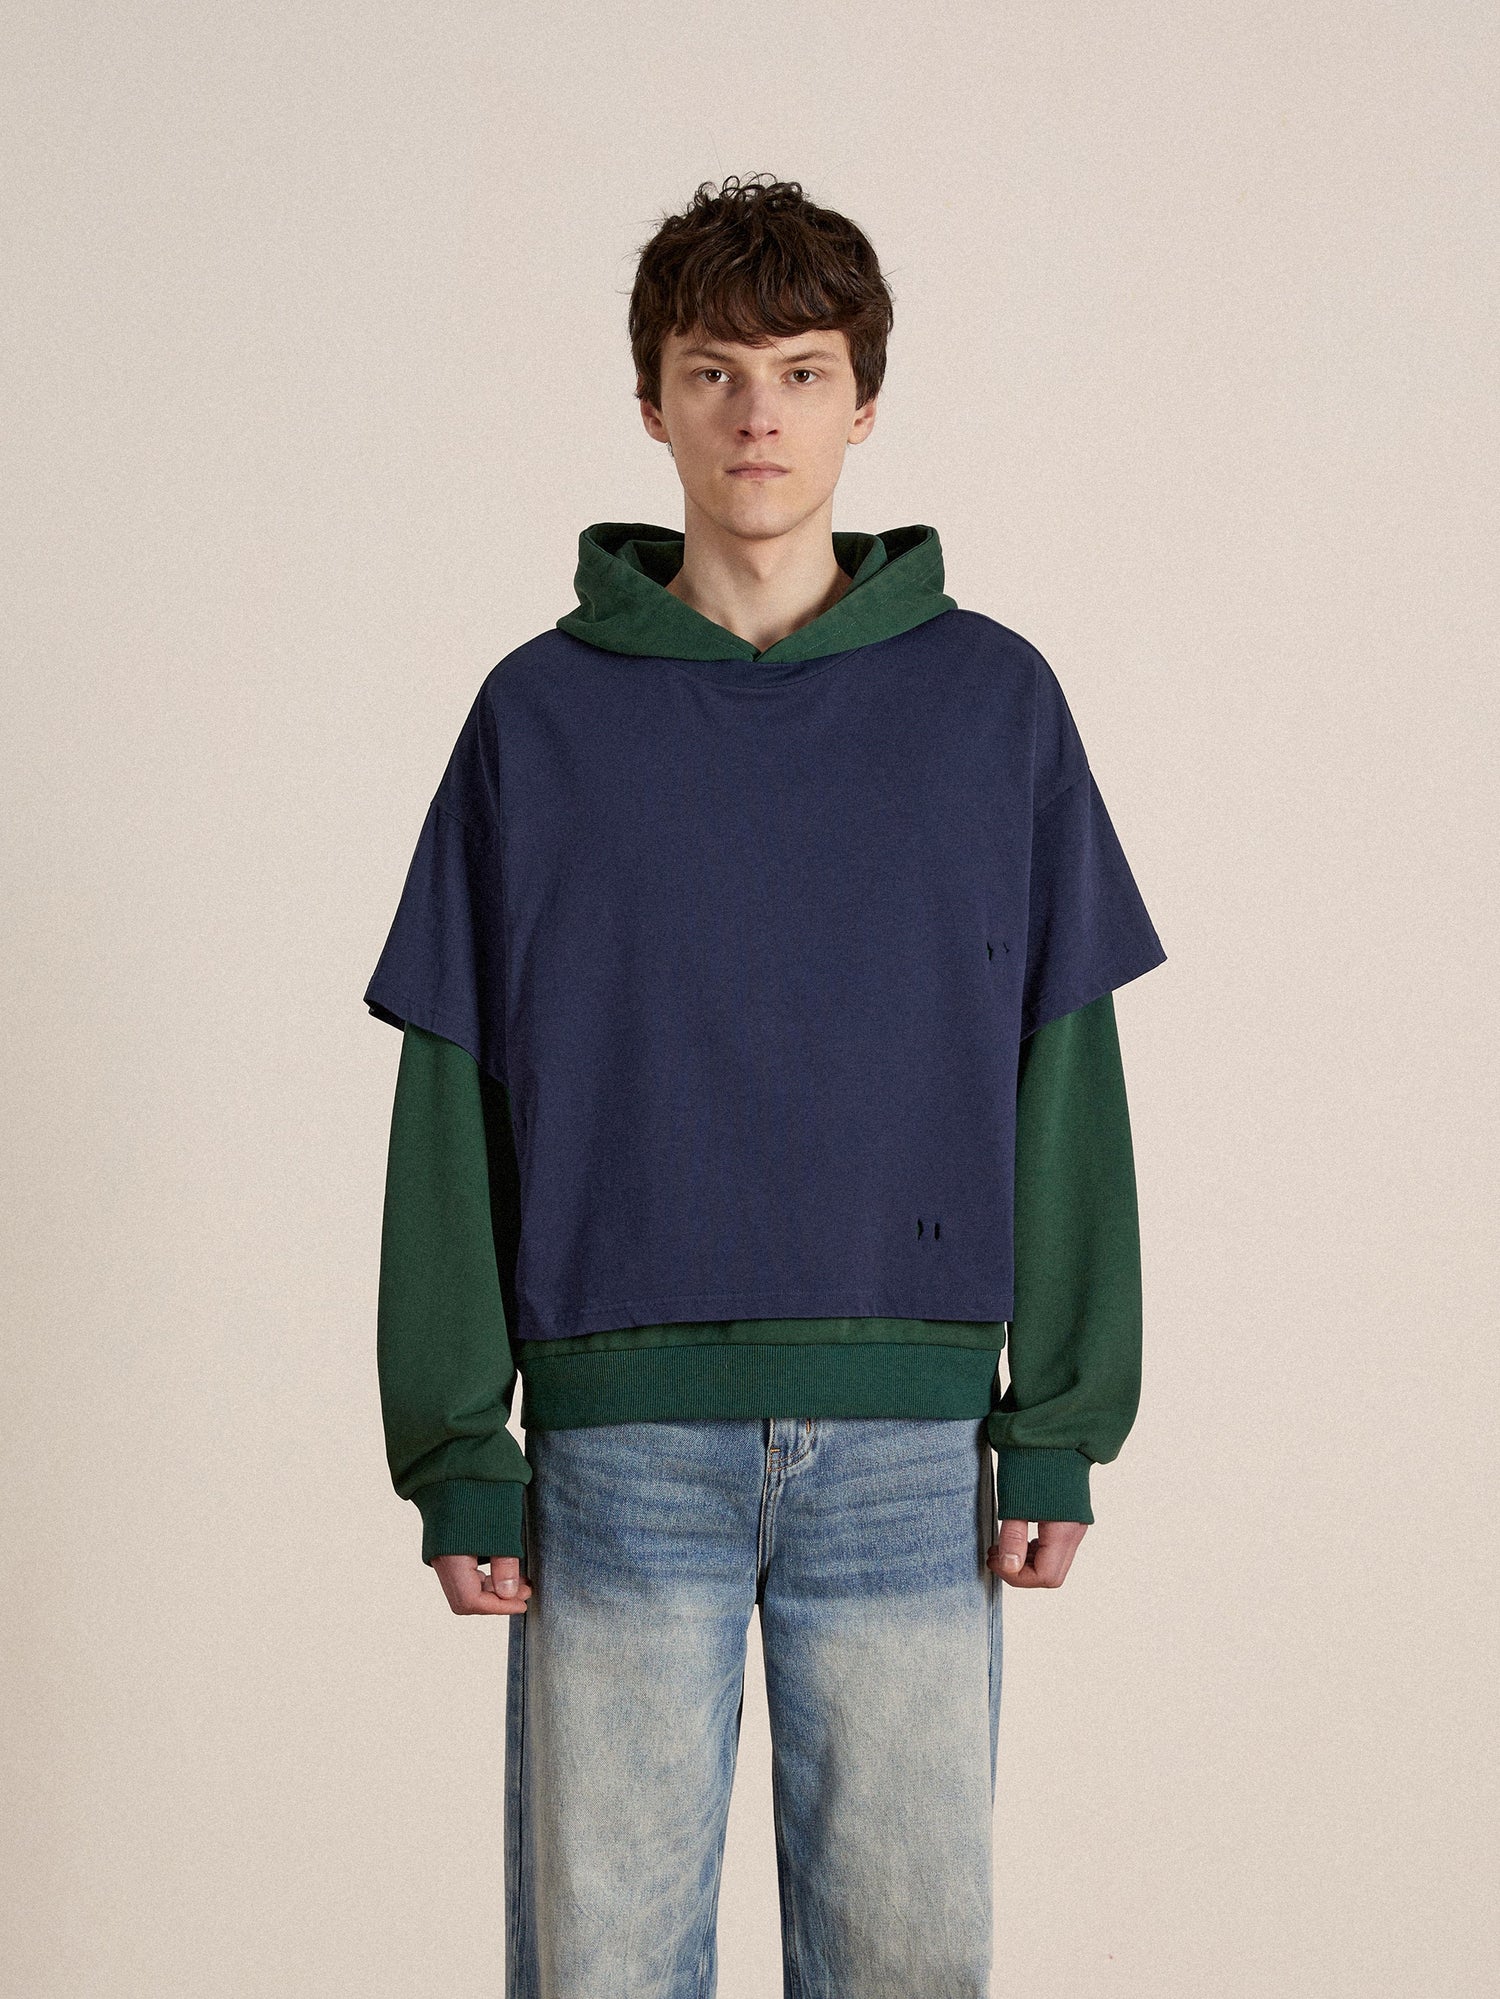 A man wearing a blue and green Found double layer hoodie and jeans.